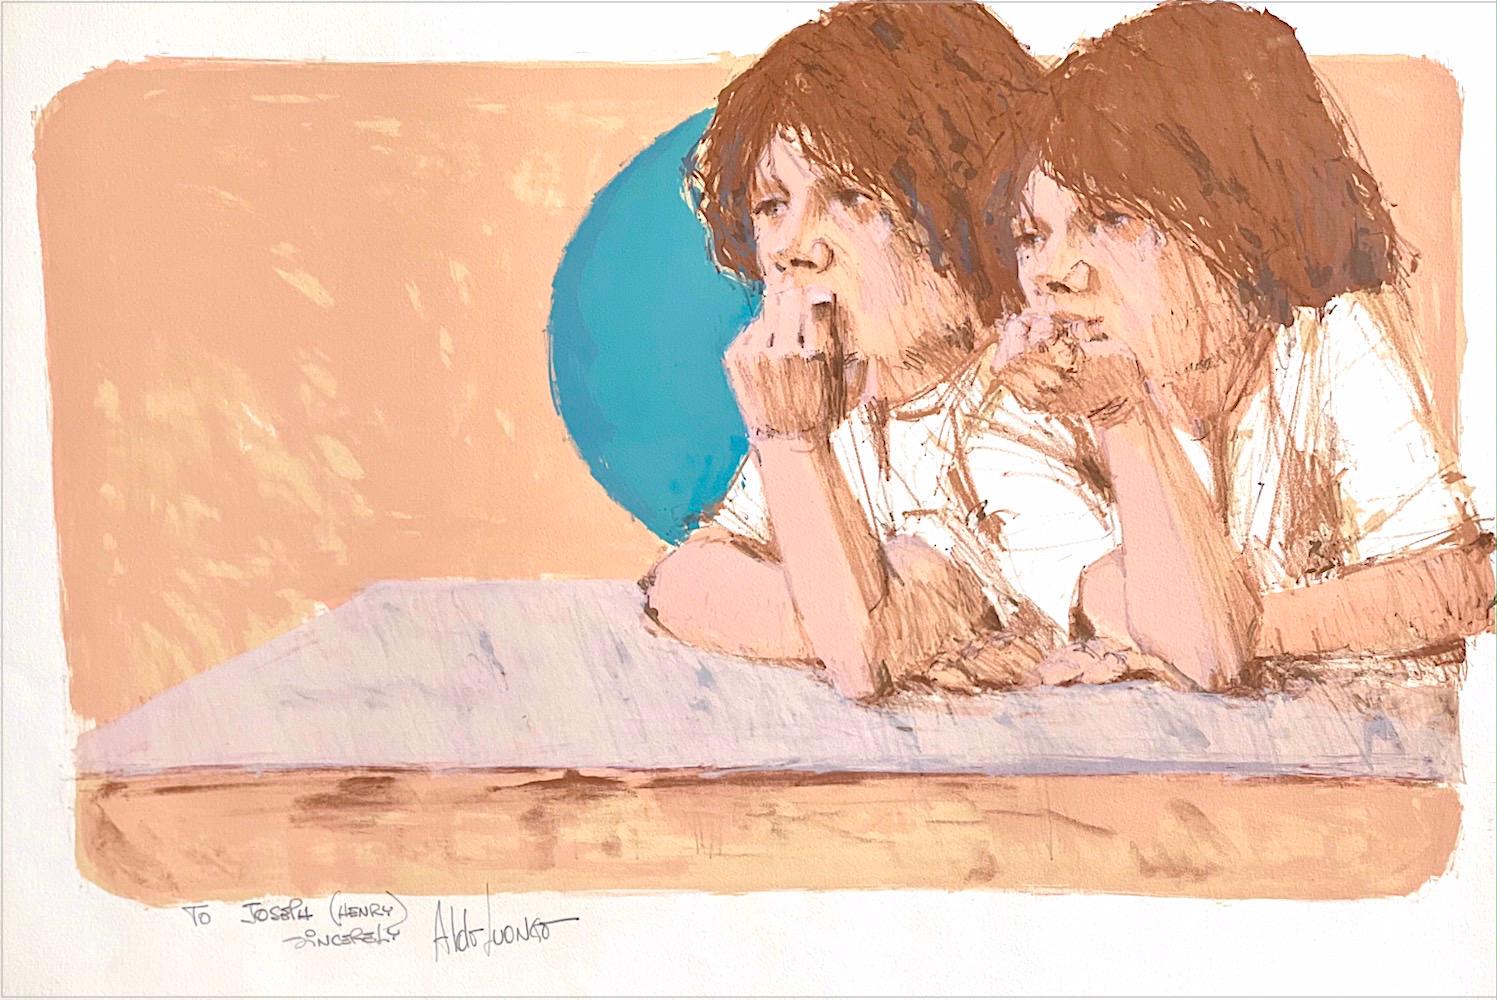 Aldo Luongo Portrait Print - BROTHERS Signed Lithograph, Portrait Young Boys, Peach, Turquoise, Pink, Brown